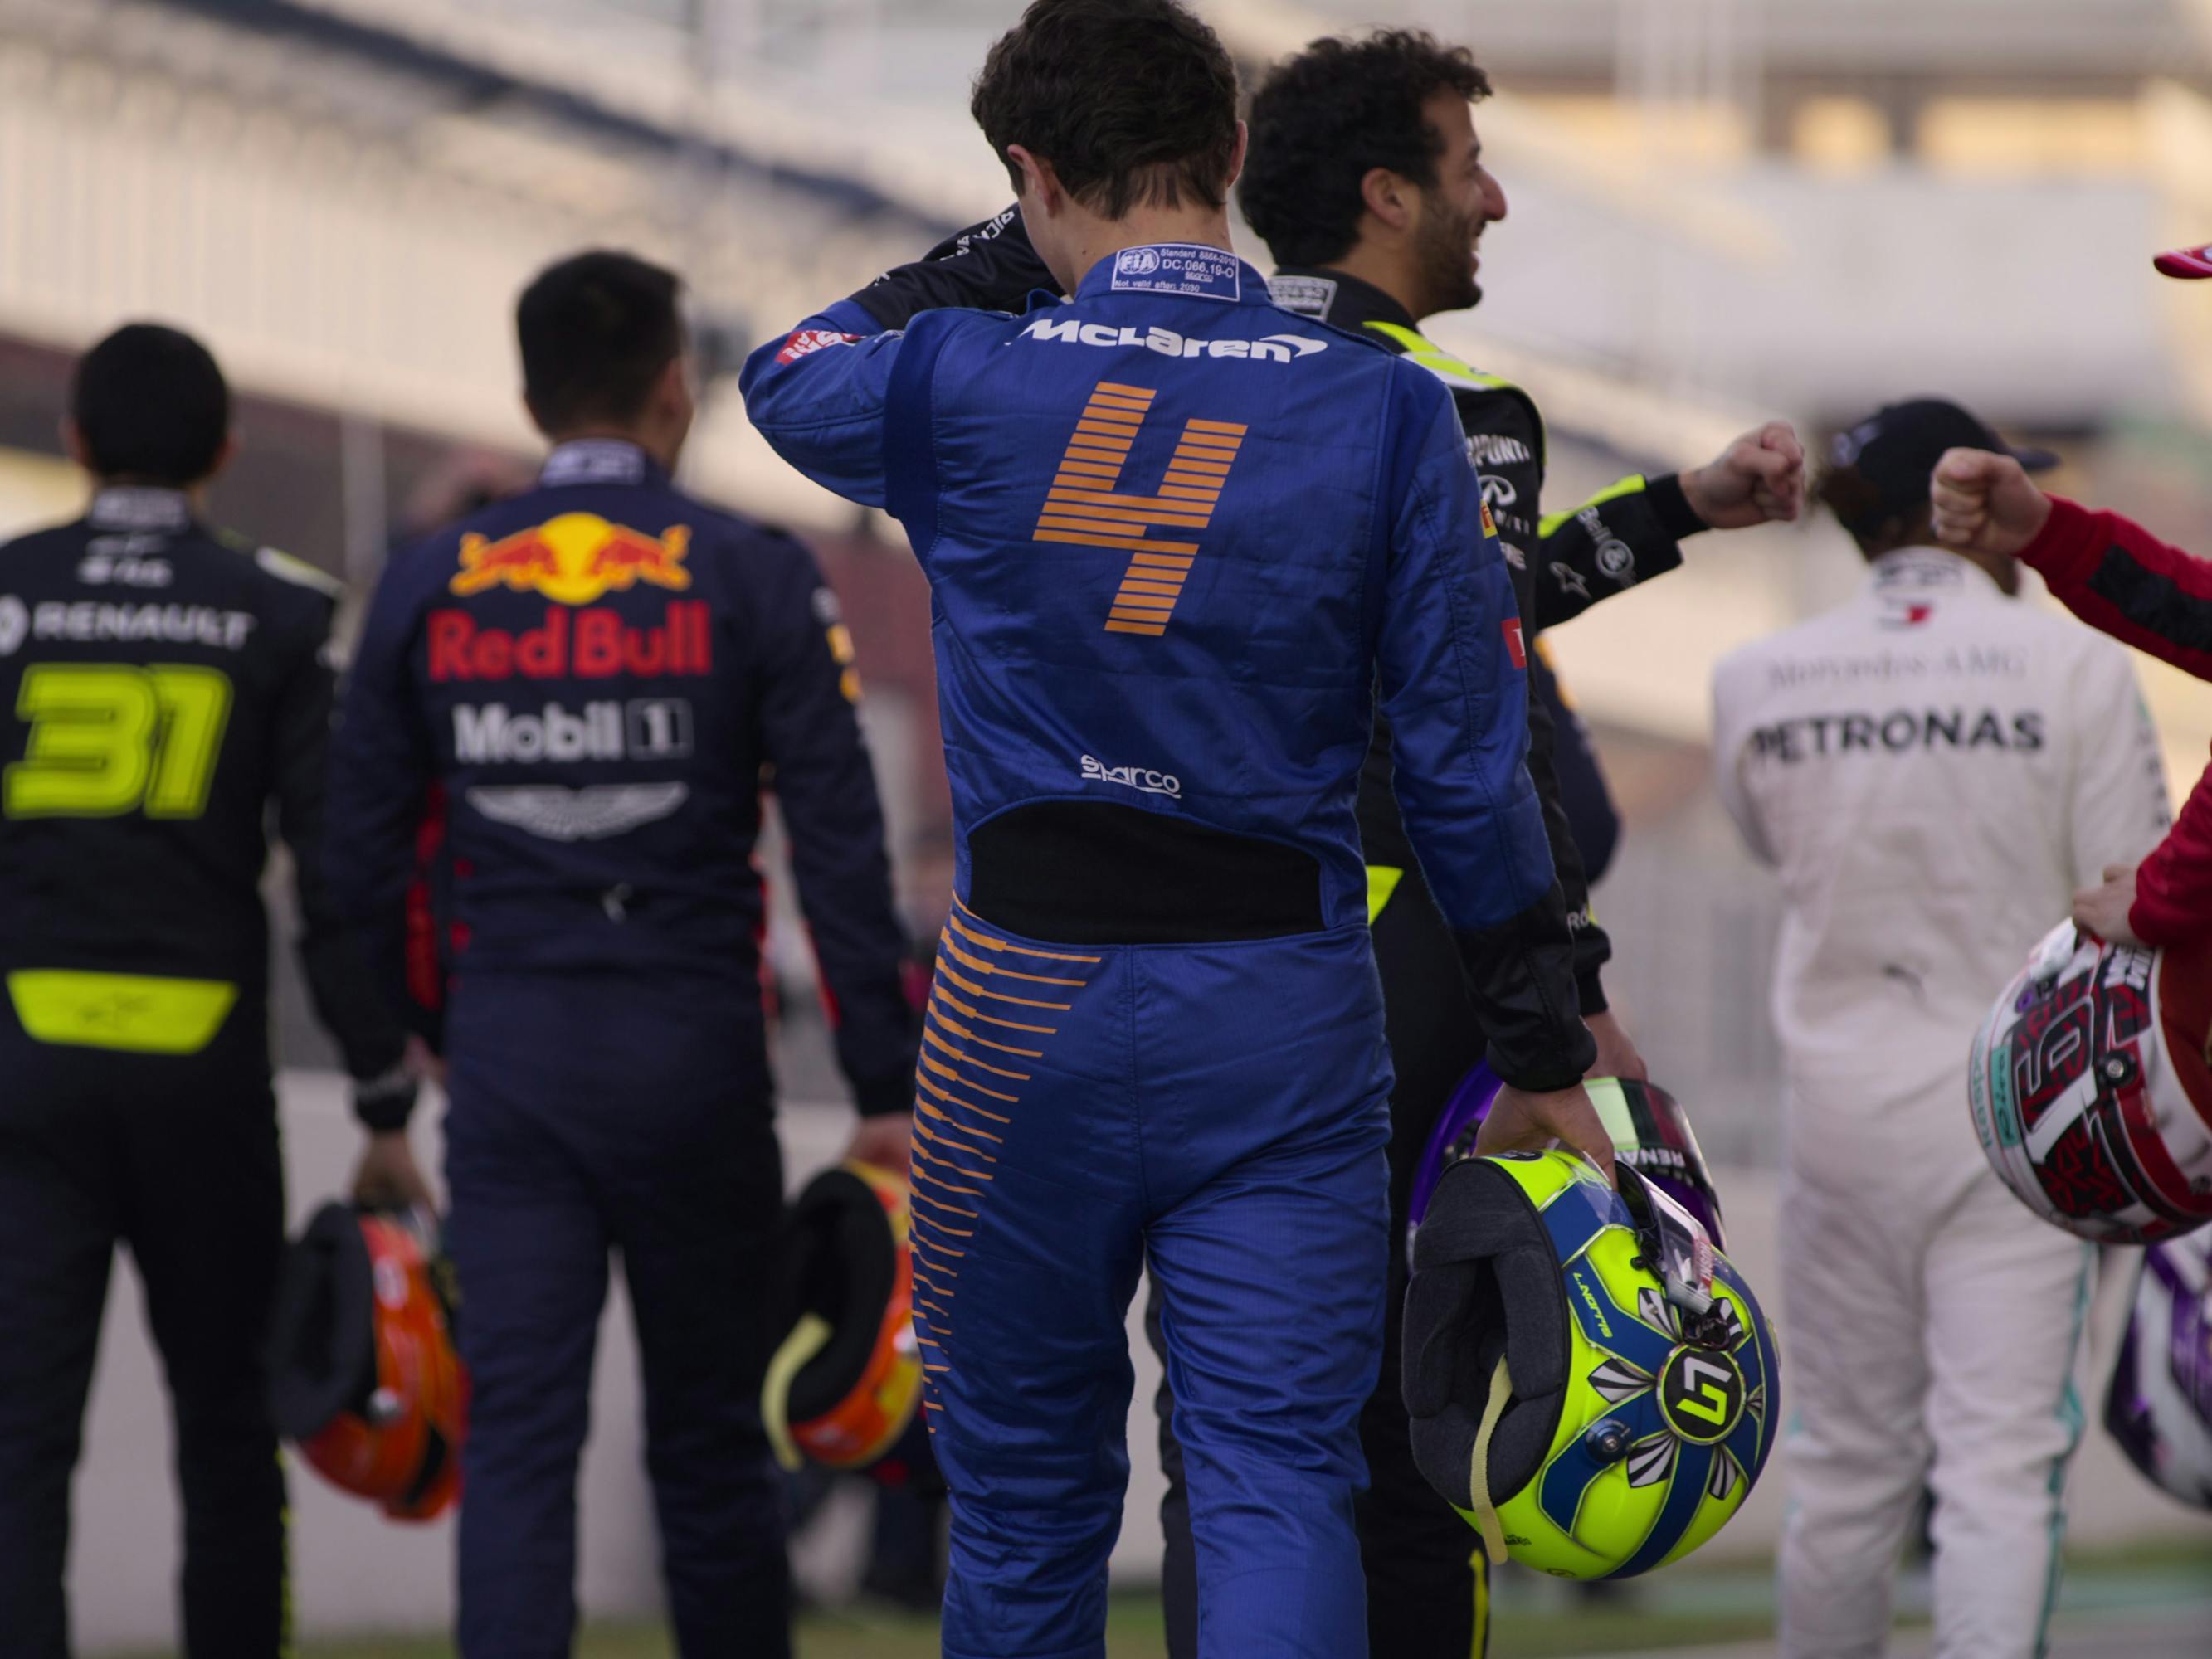 Formula 1 drivers stand with their backs to the camera.